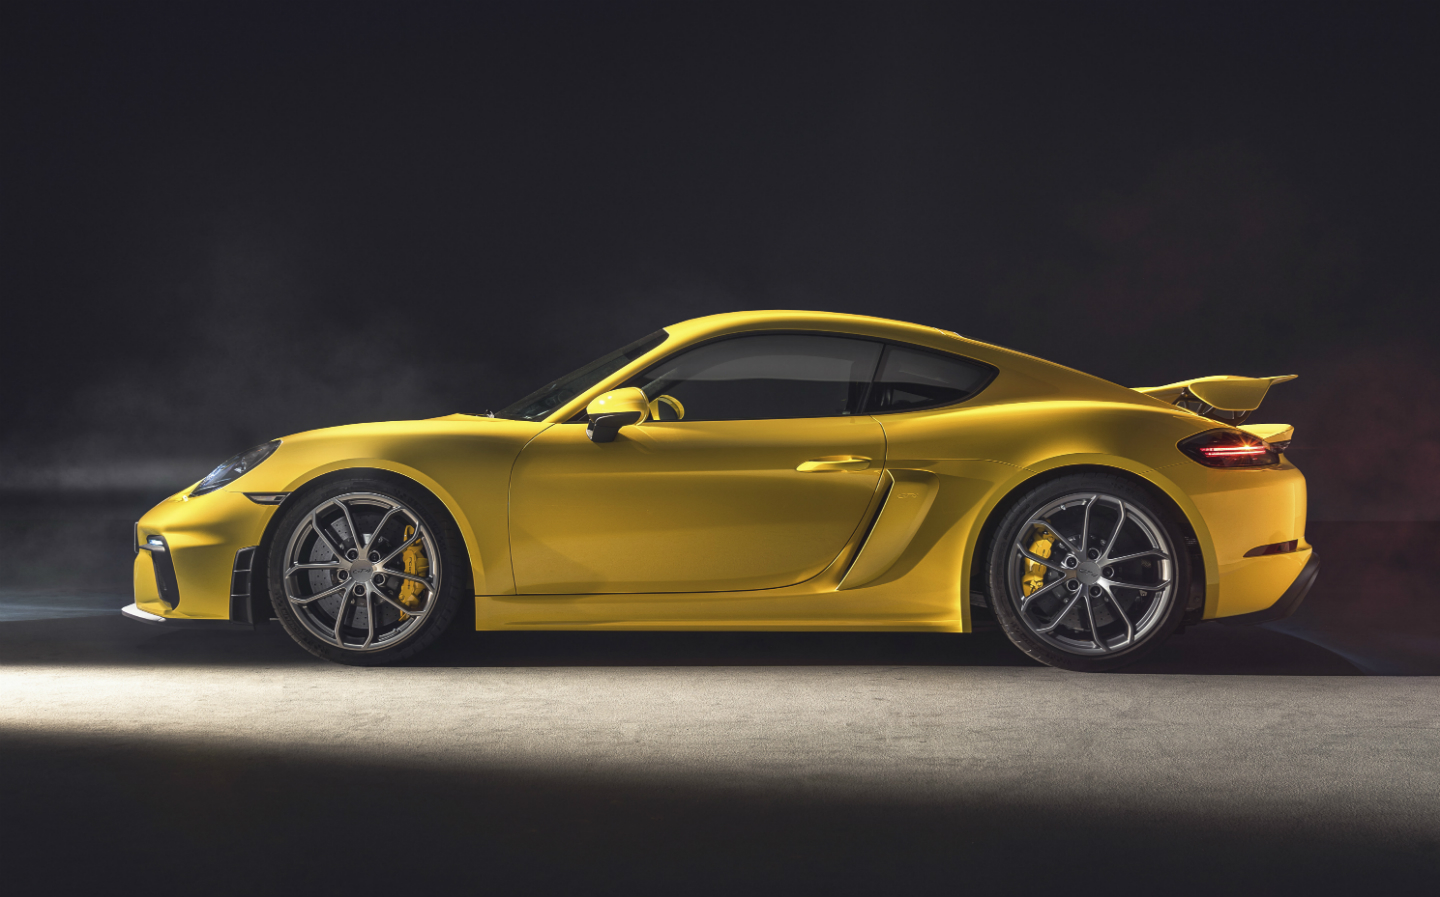 2019 Porsche 718 Cayman GT4: price, power, performance and release date